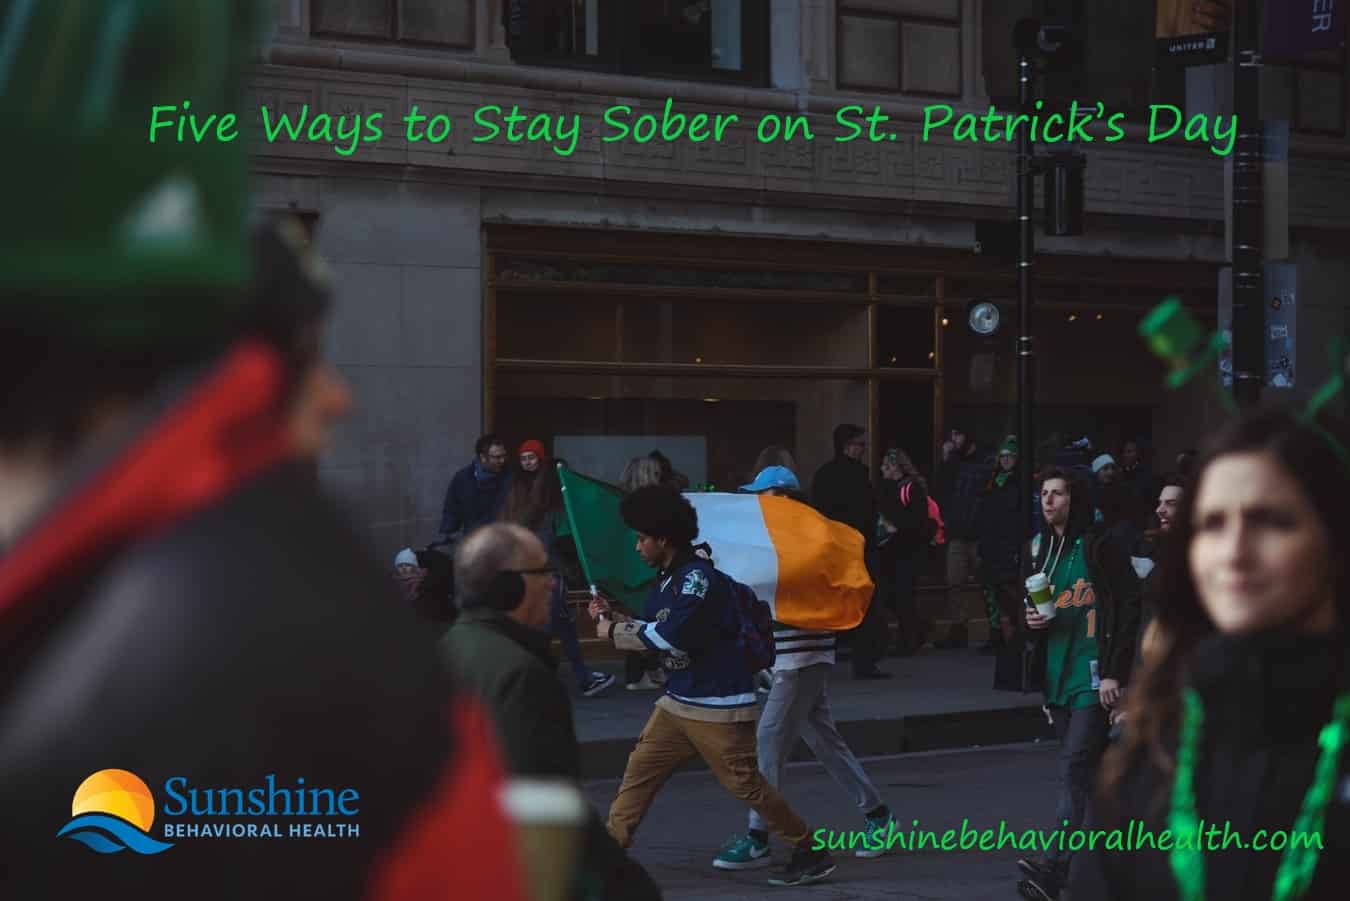 Five Ways to Stay Sober on St. Patrick’s Day